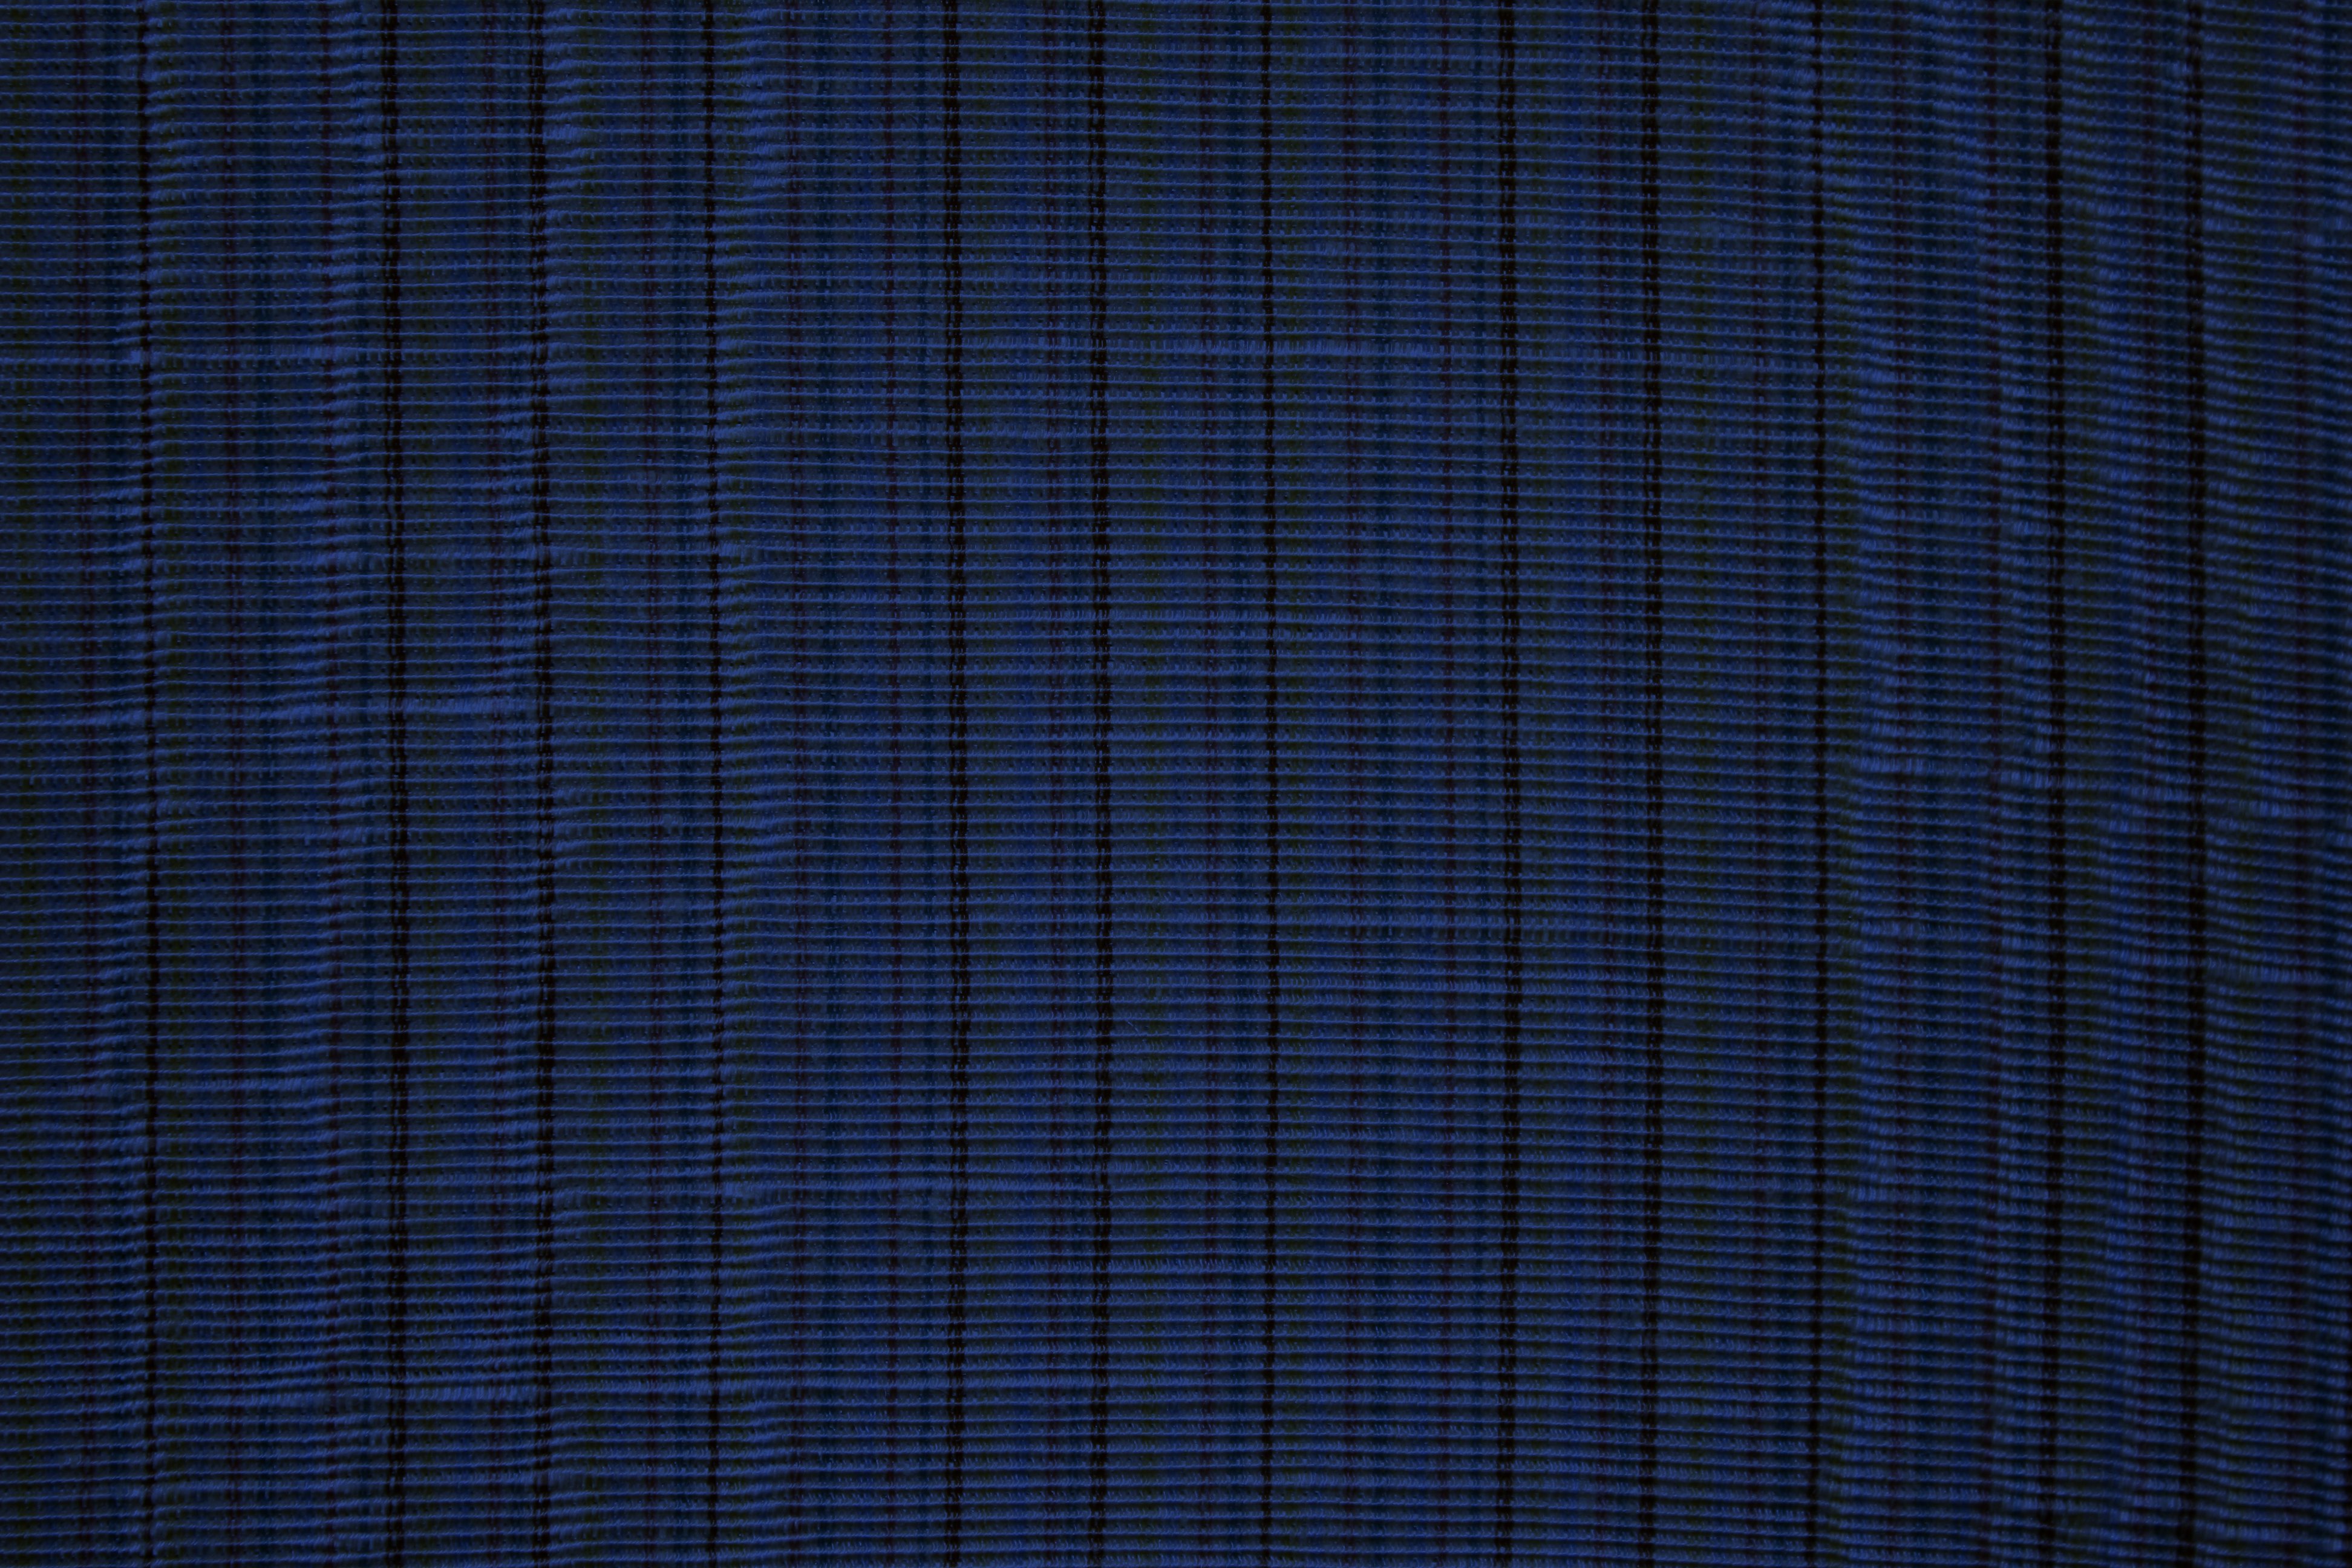 Cool Backgrounds Collection - Dark Blue Plaid Background - HD Wallpaper 